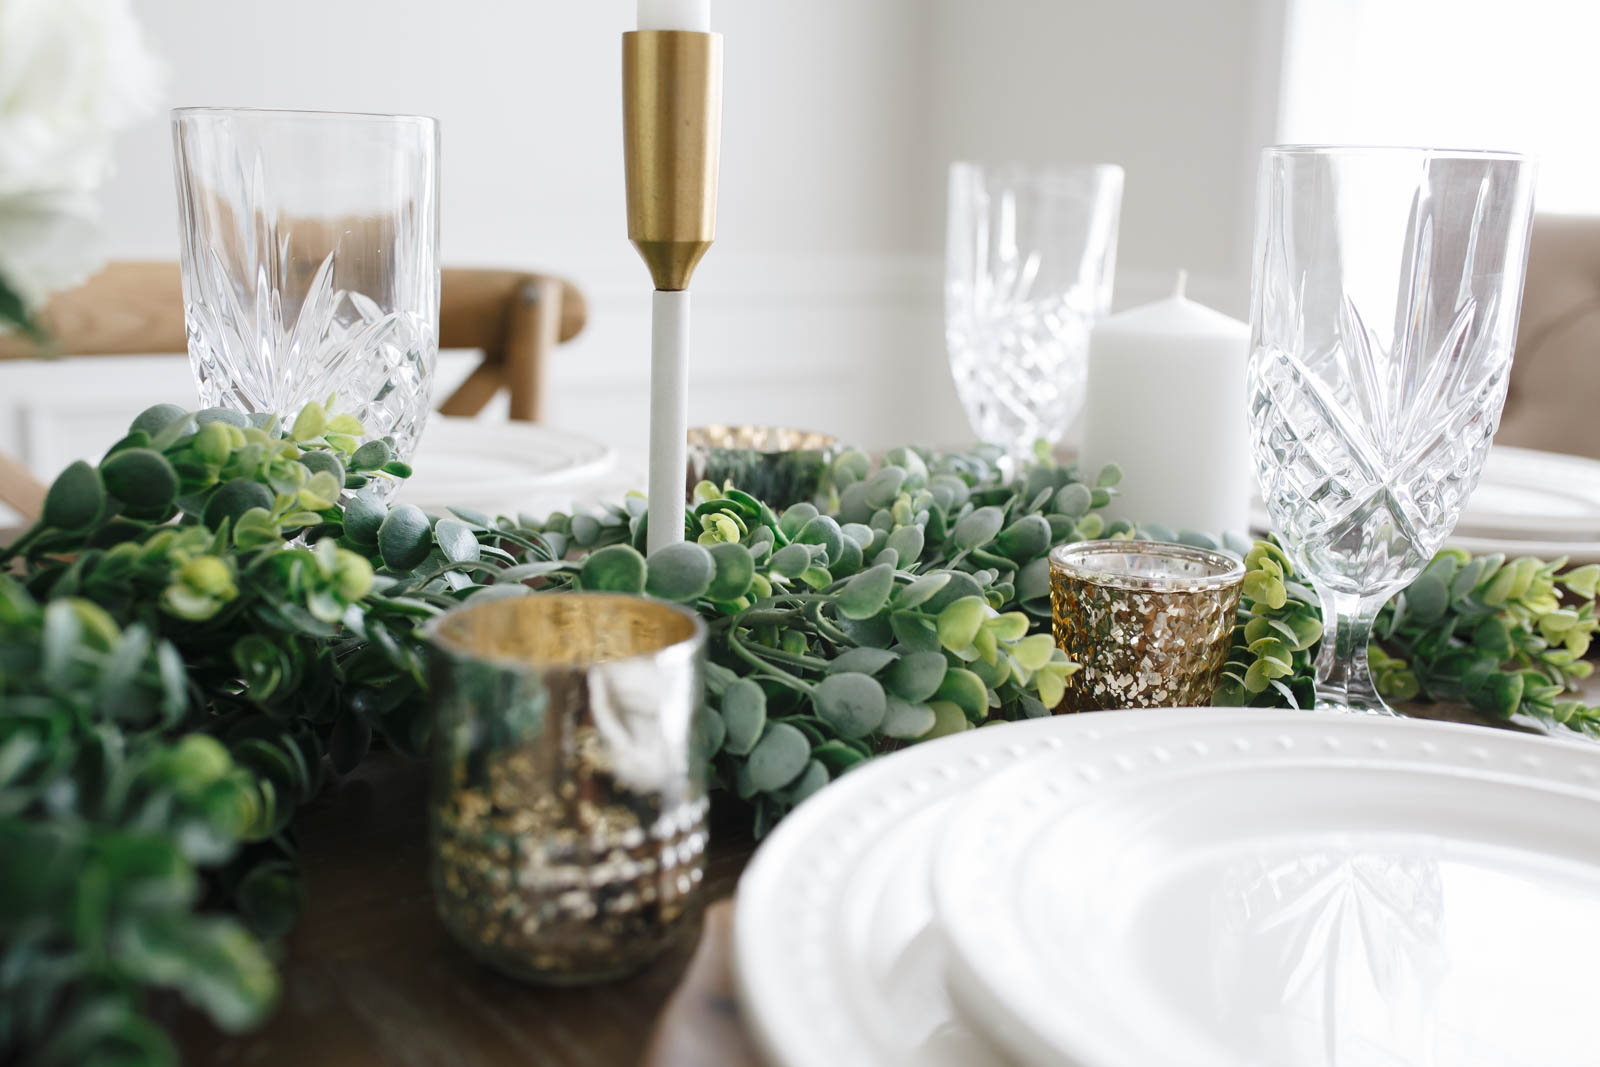 Holiday Tablescape 2017 | Winter Greenery | Hydrangeas | Winter Berries | World Market | White and Gold | via @maeamor